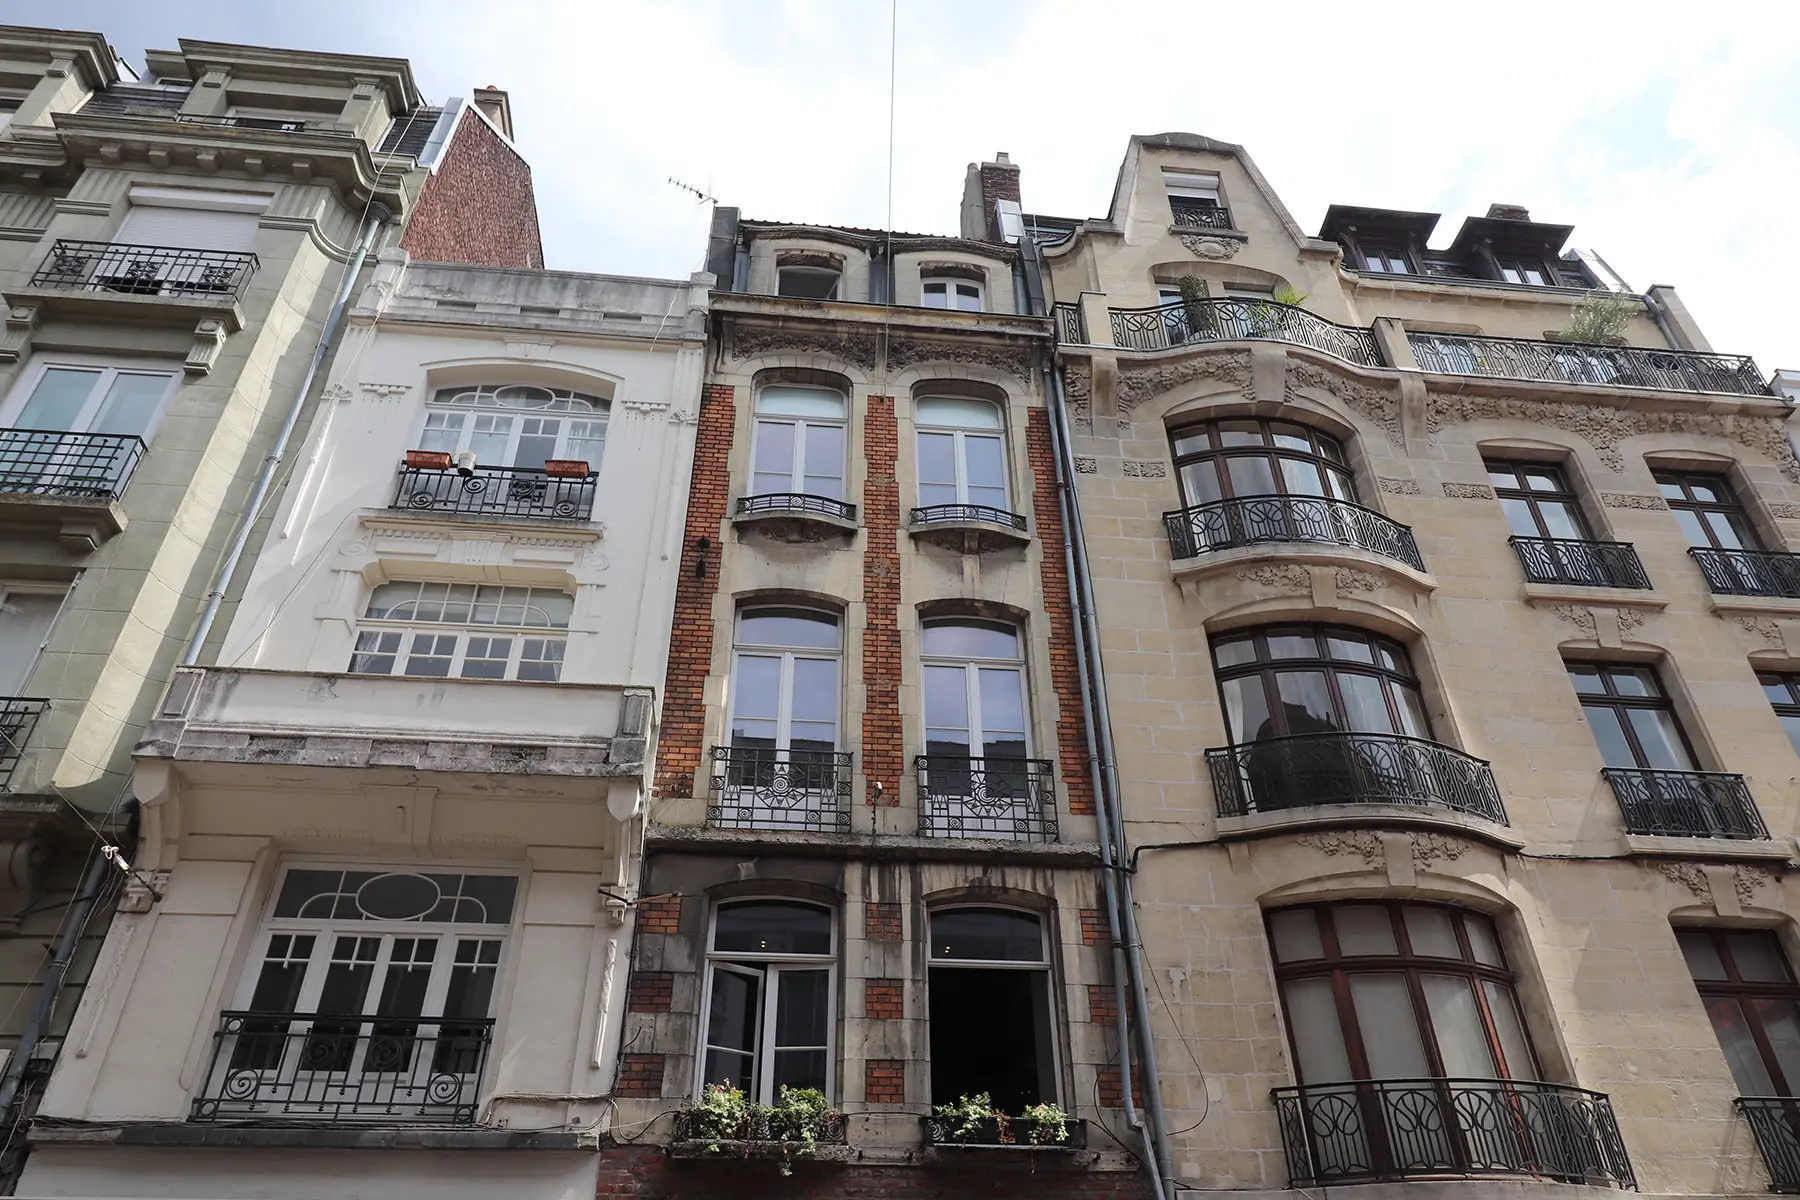 Façade of an old-fashioned apartment building in Lille